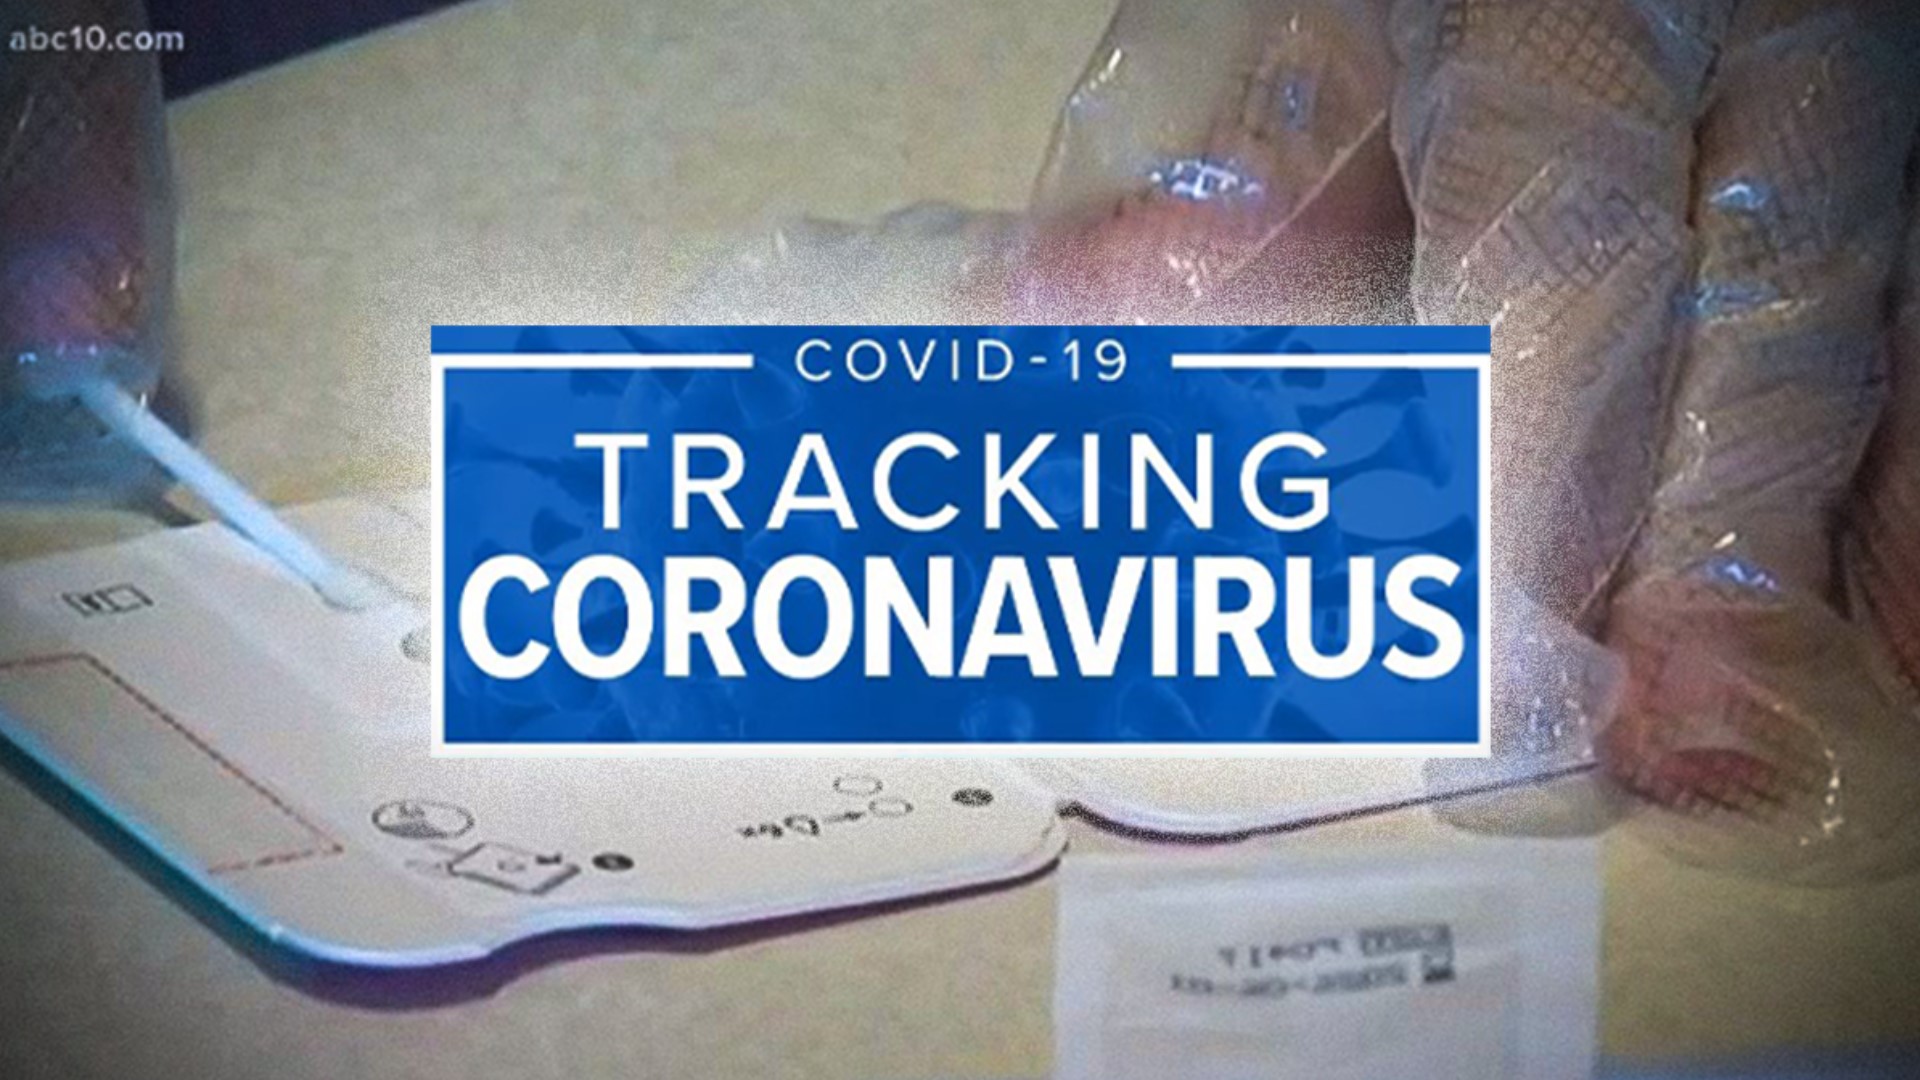 With the warning that the delta variant is still out among the countywide surge of COVID-19 cases, more protective gear and medical supplies means better responses.